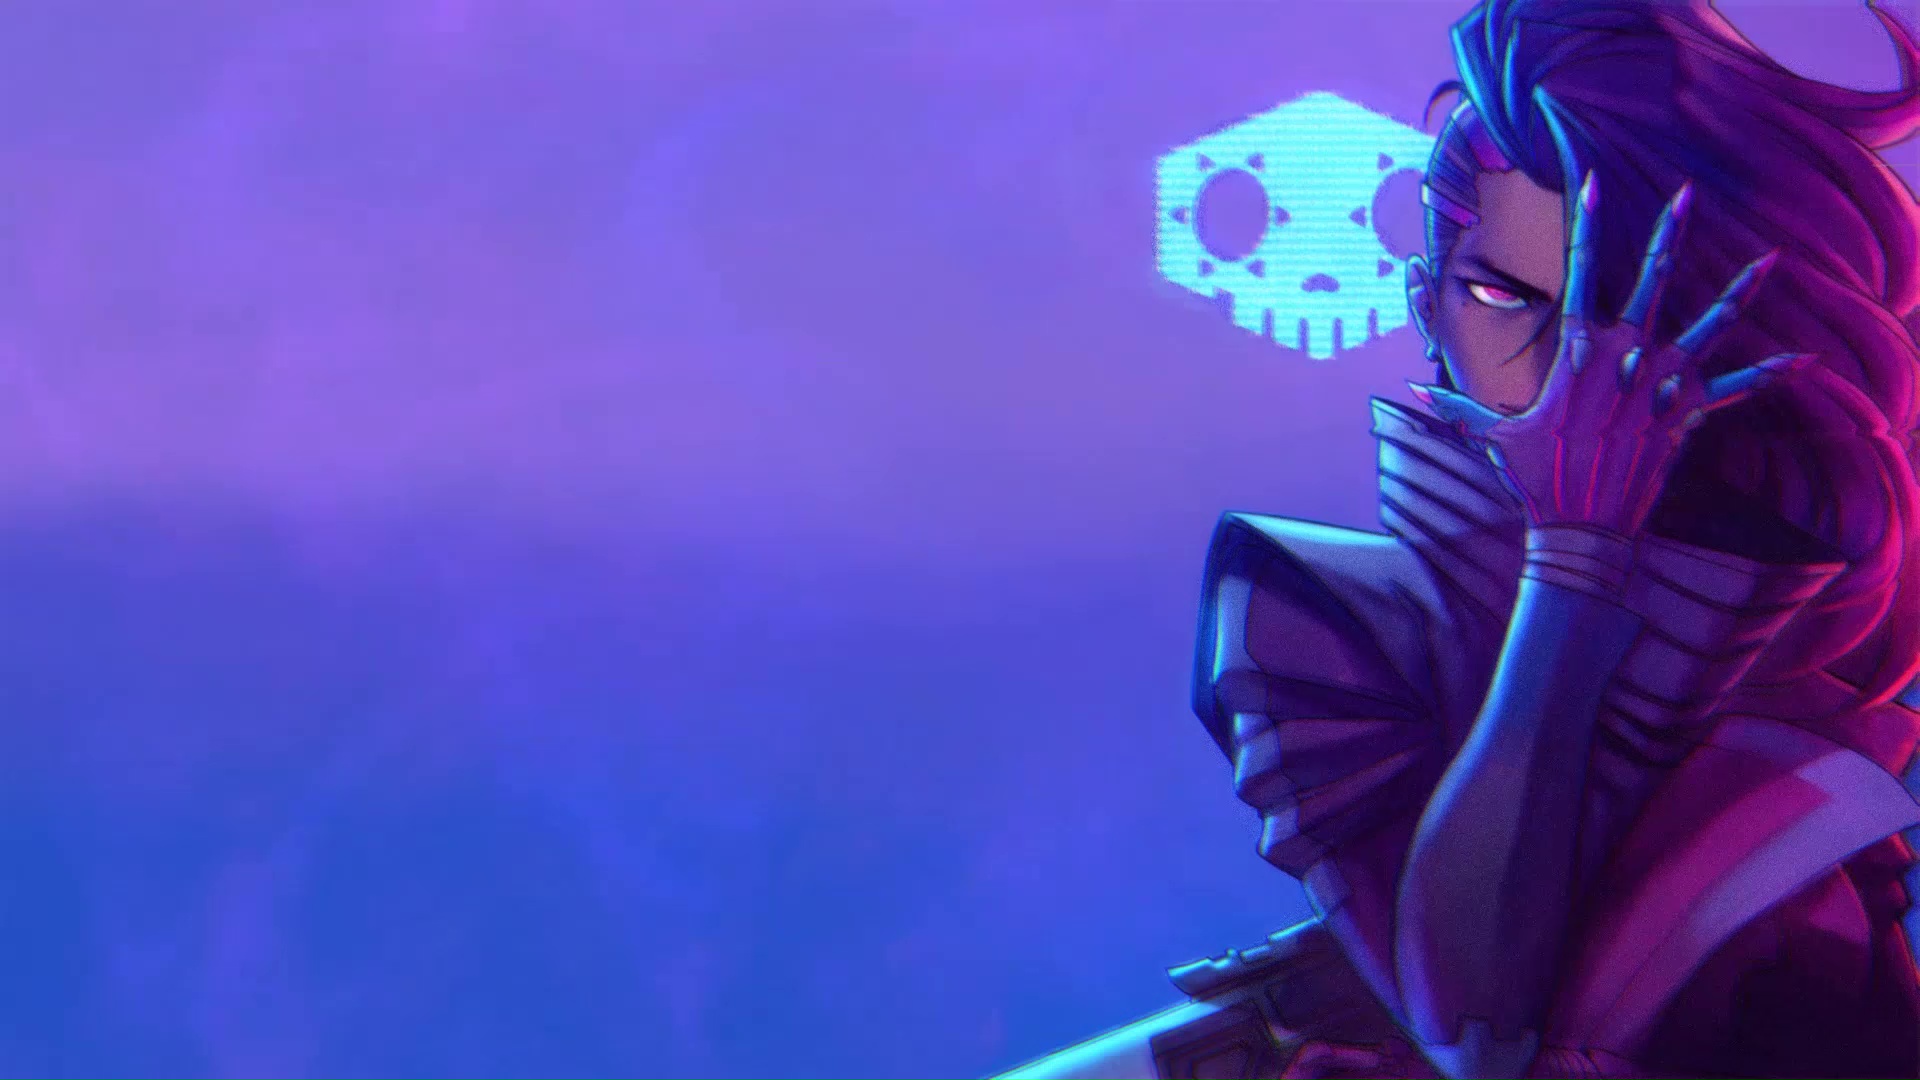 Some of the Best Sombra Fan Art from Around the Internet